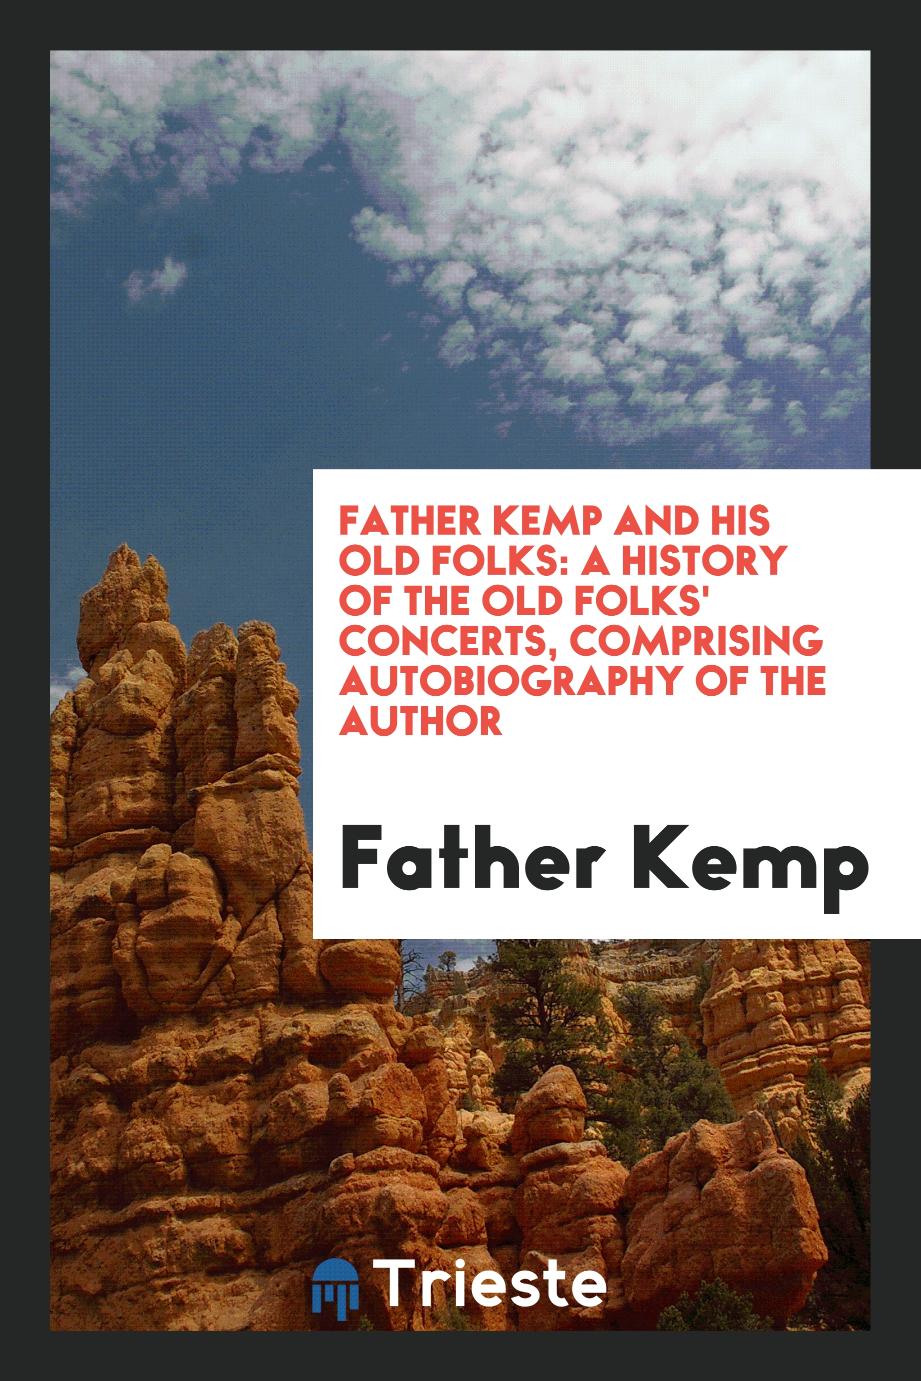 Father Kemp and his old folks: A history of the old folks' concerts, comprising autobiography of the author